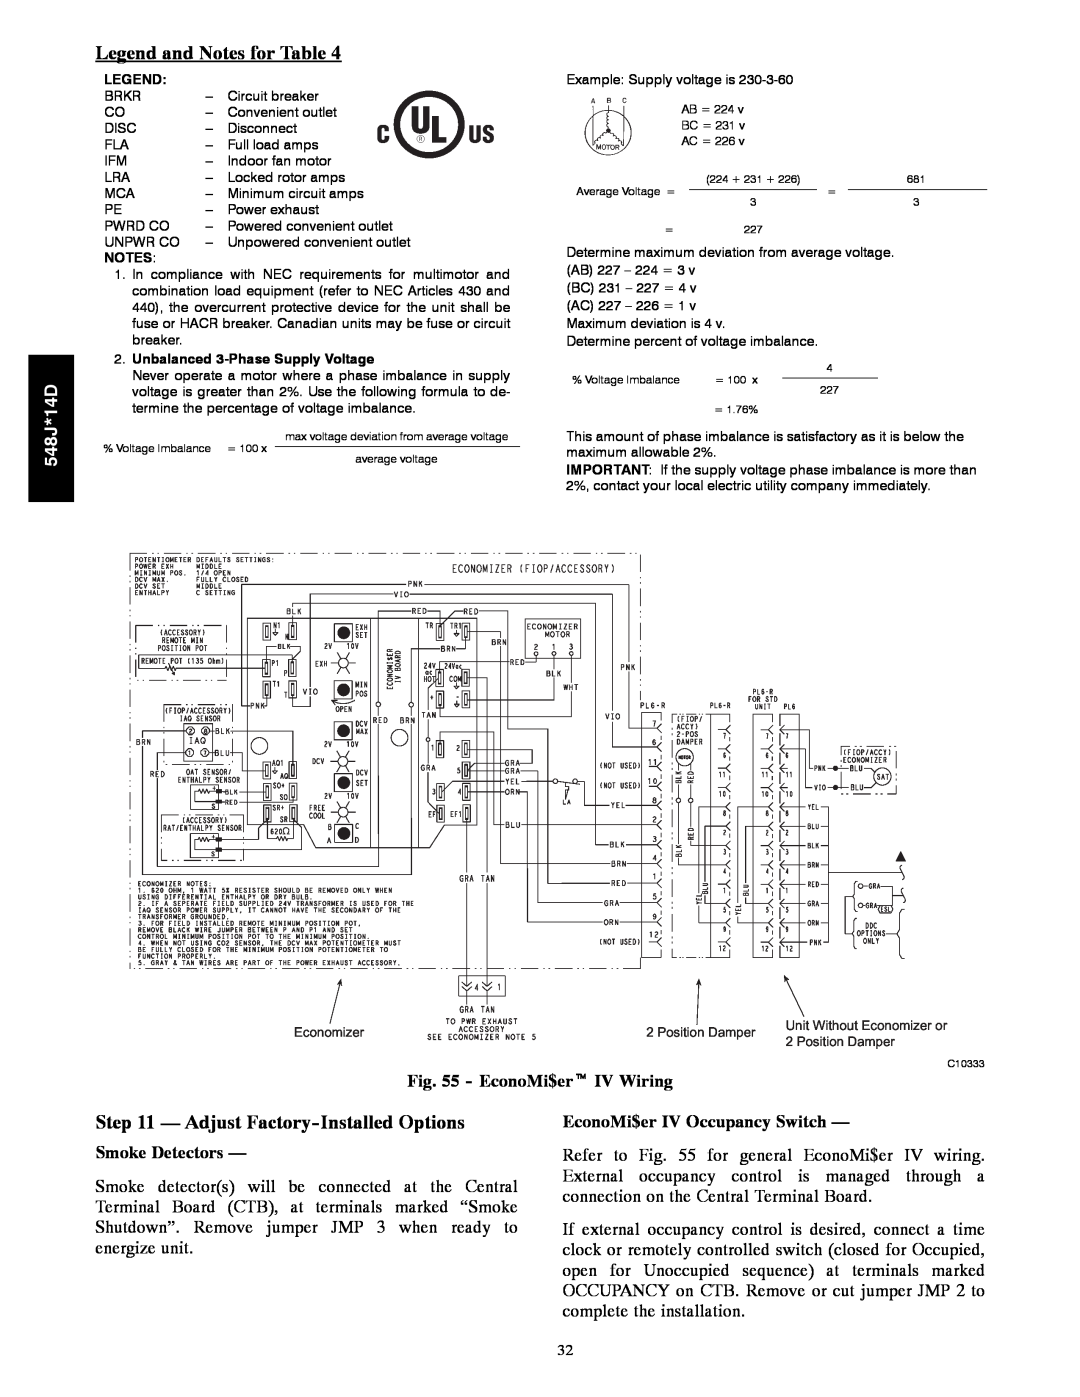 Bryant 548J*14D Legend and Notes for Table, Adjust Factory-Installed Options, EconoMi$ert IV Wiring, Smoke Detectors 